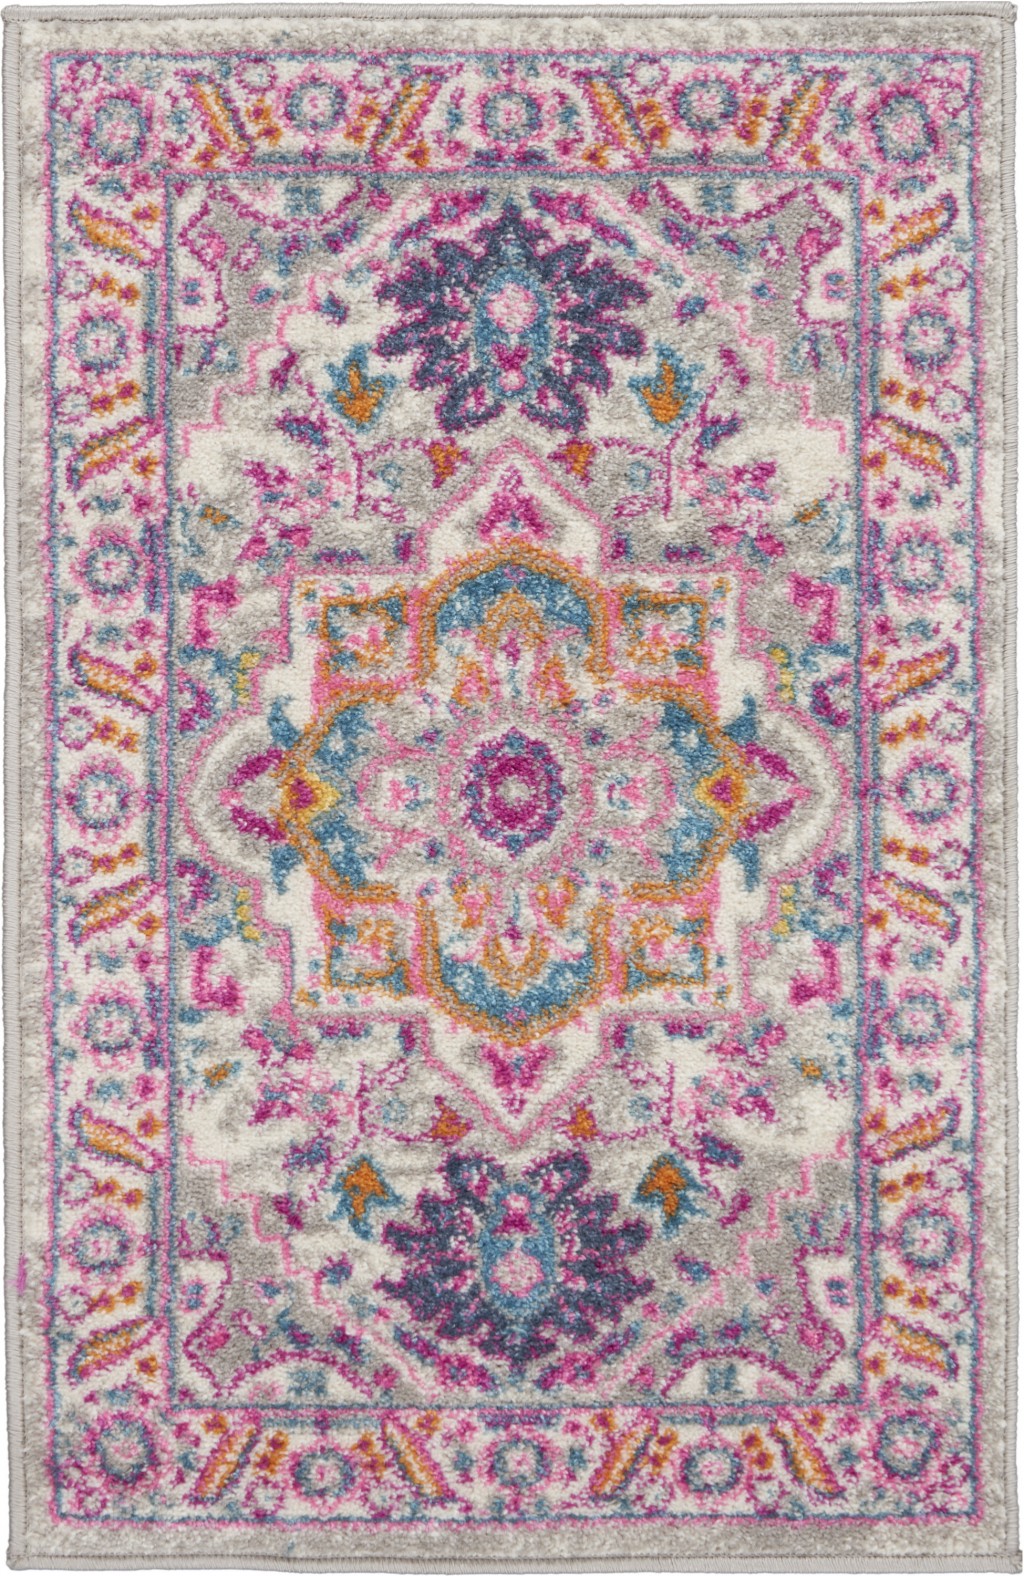 2' X 3' Pink And Gray Power Loom Area Rug-385491-1